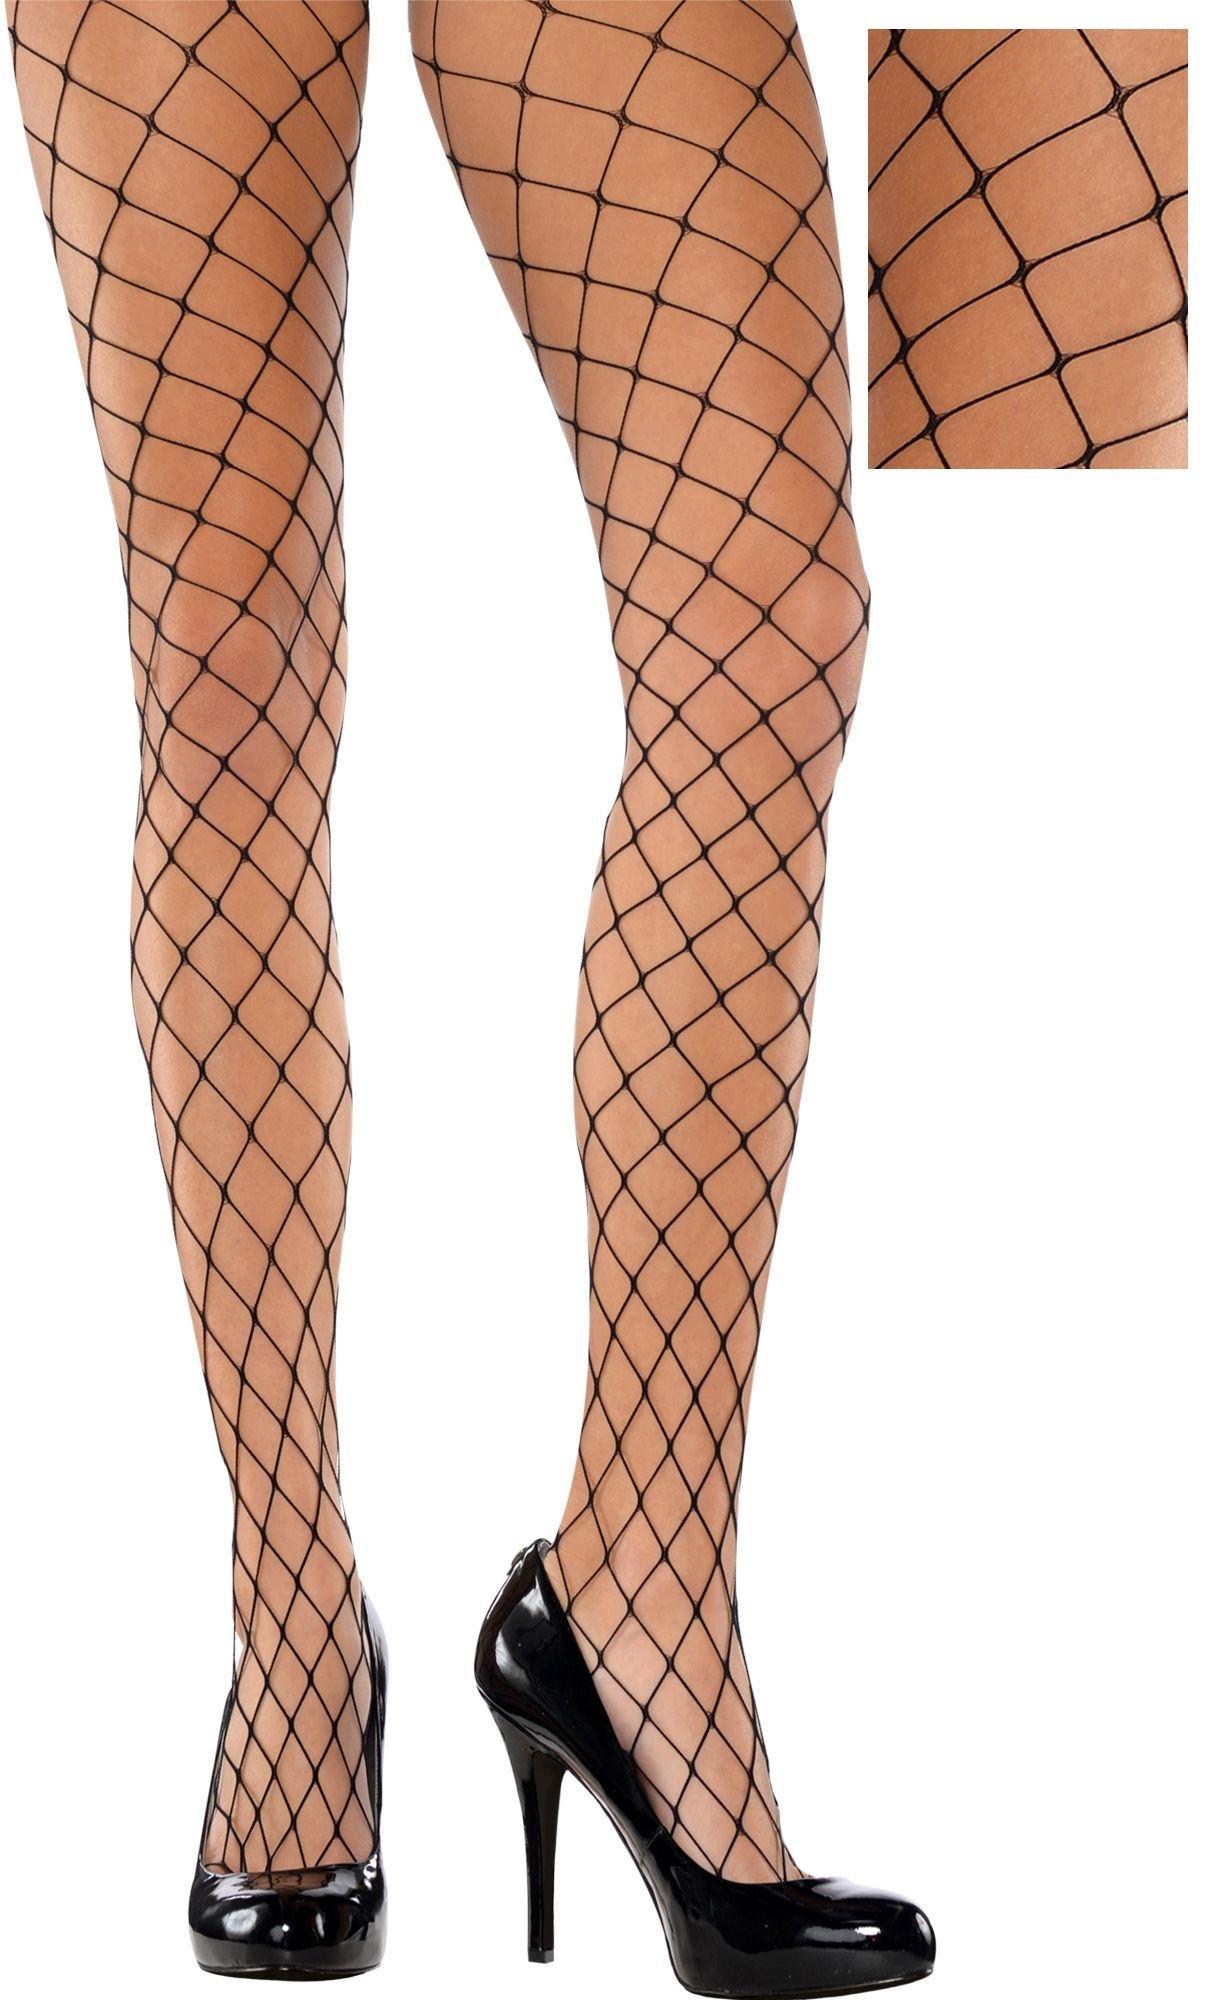 Black Deluxe Fishnet with Comfort Sole for Women